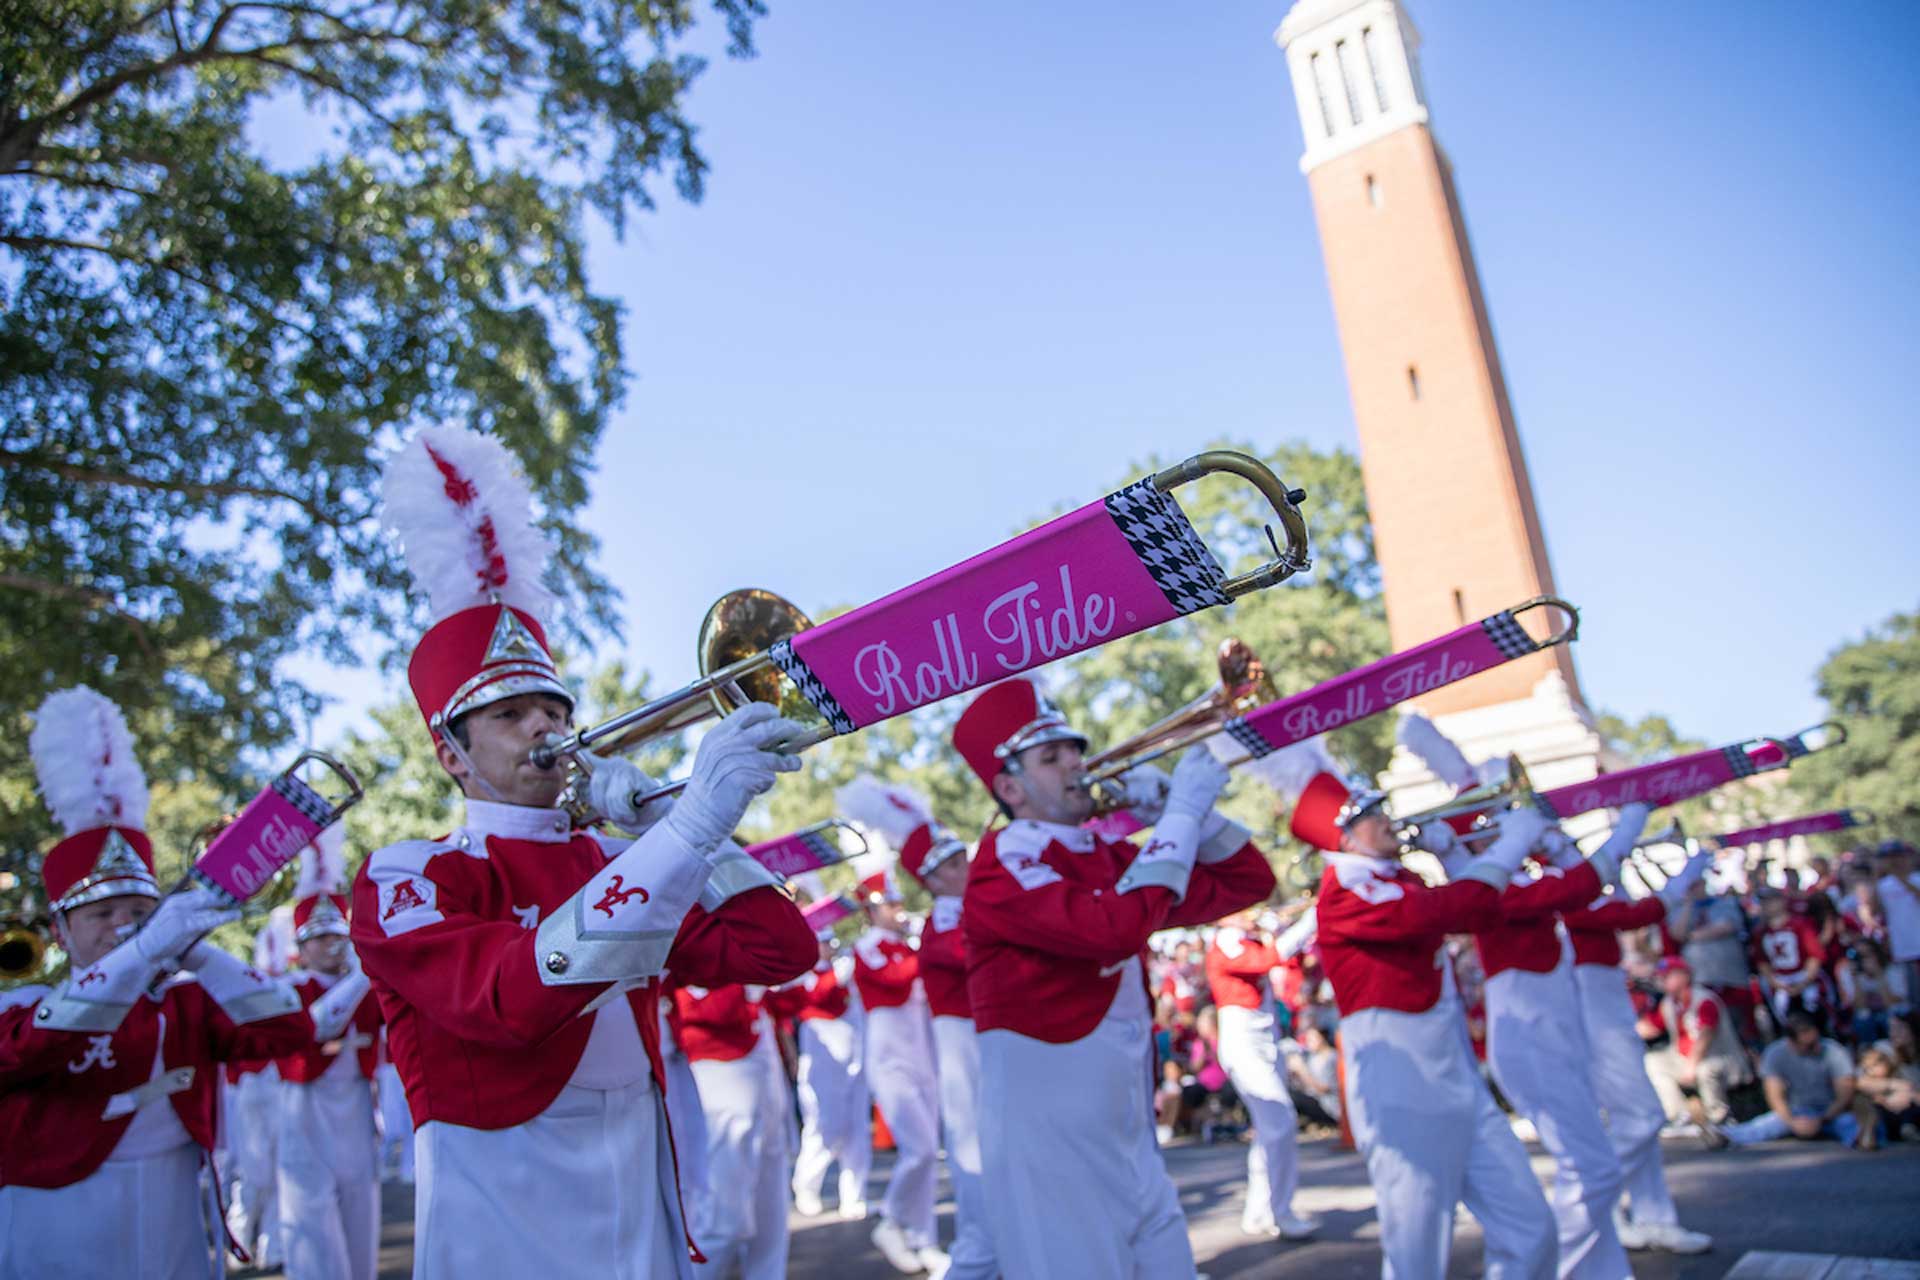 Several people dressed in marching band gear play instruments while in the homecoming parade.